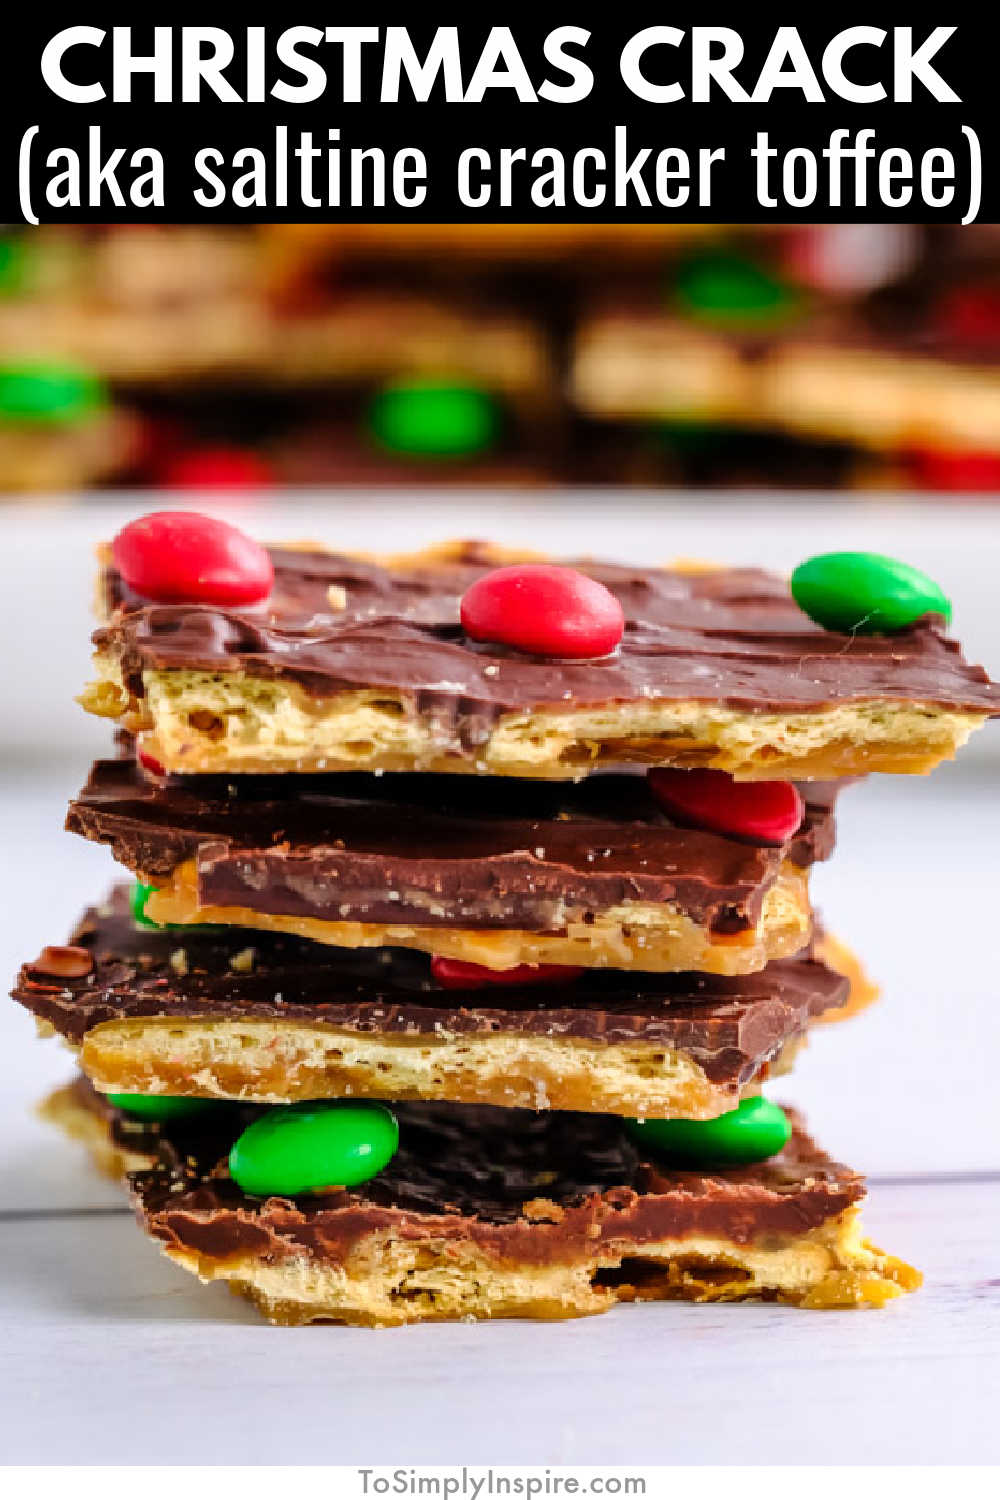 Christmas Crack Saltine Cracker Toffee - To Simply Inspire